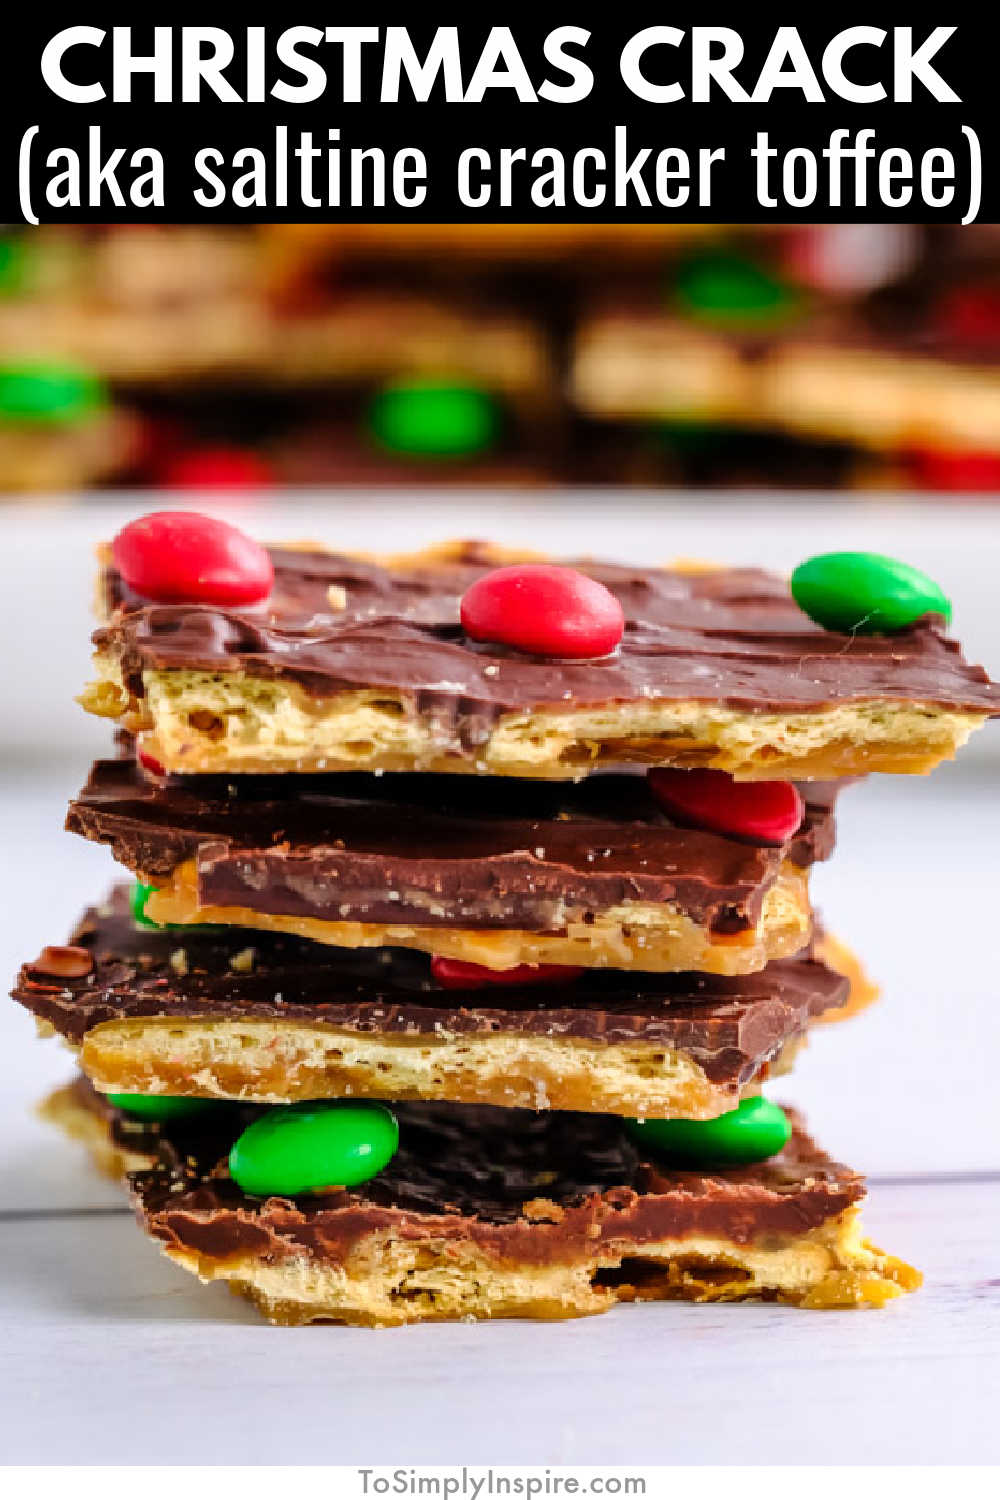 Christmas Crack Saltine Cracker Toffee - To Simply Inspire